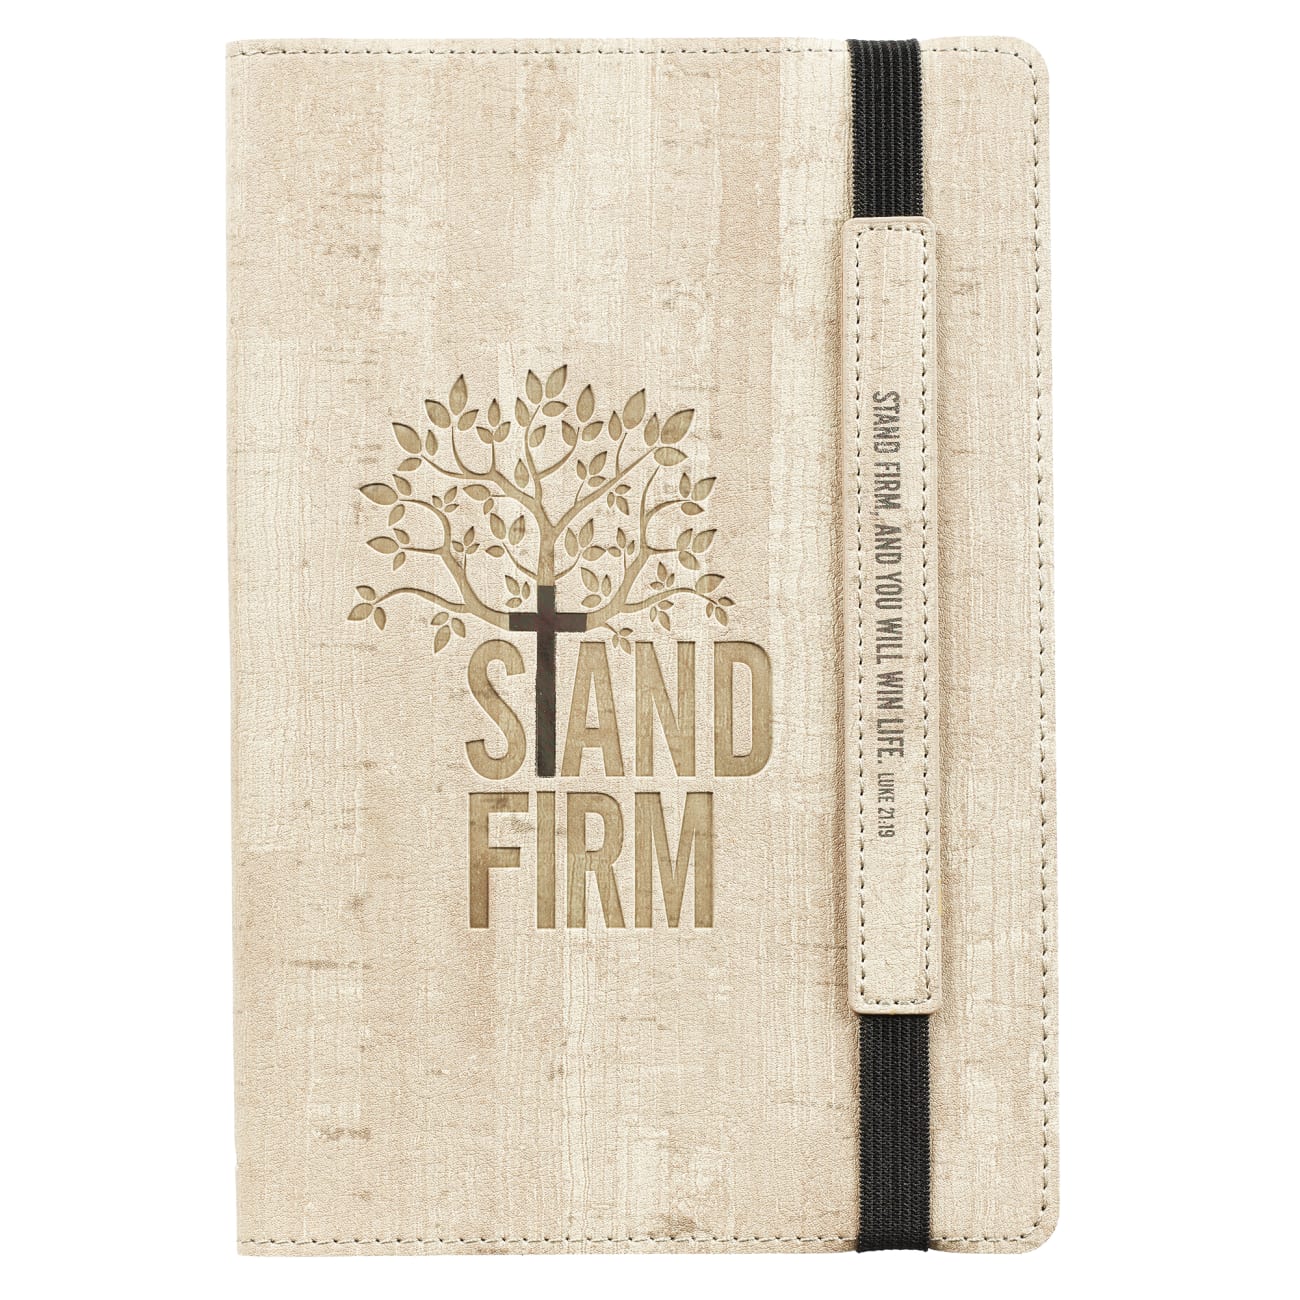 Dot Grid Journal: Stand Firm, Sand With Elastic Closure Imitation Leather